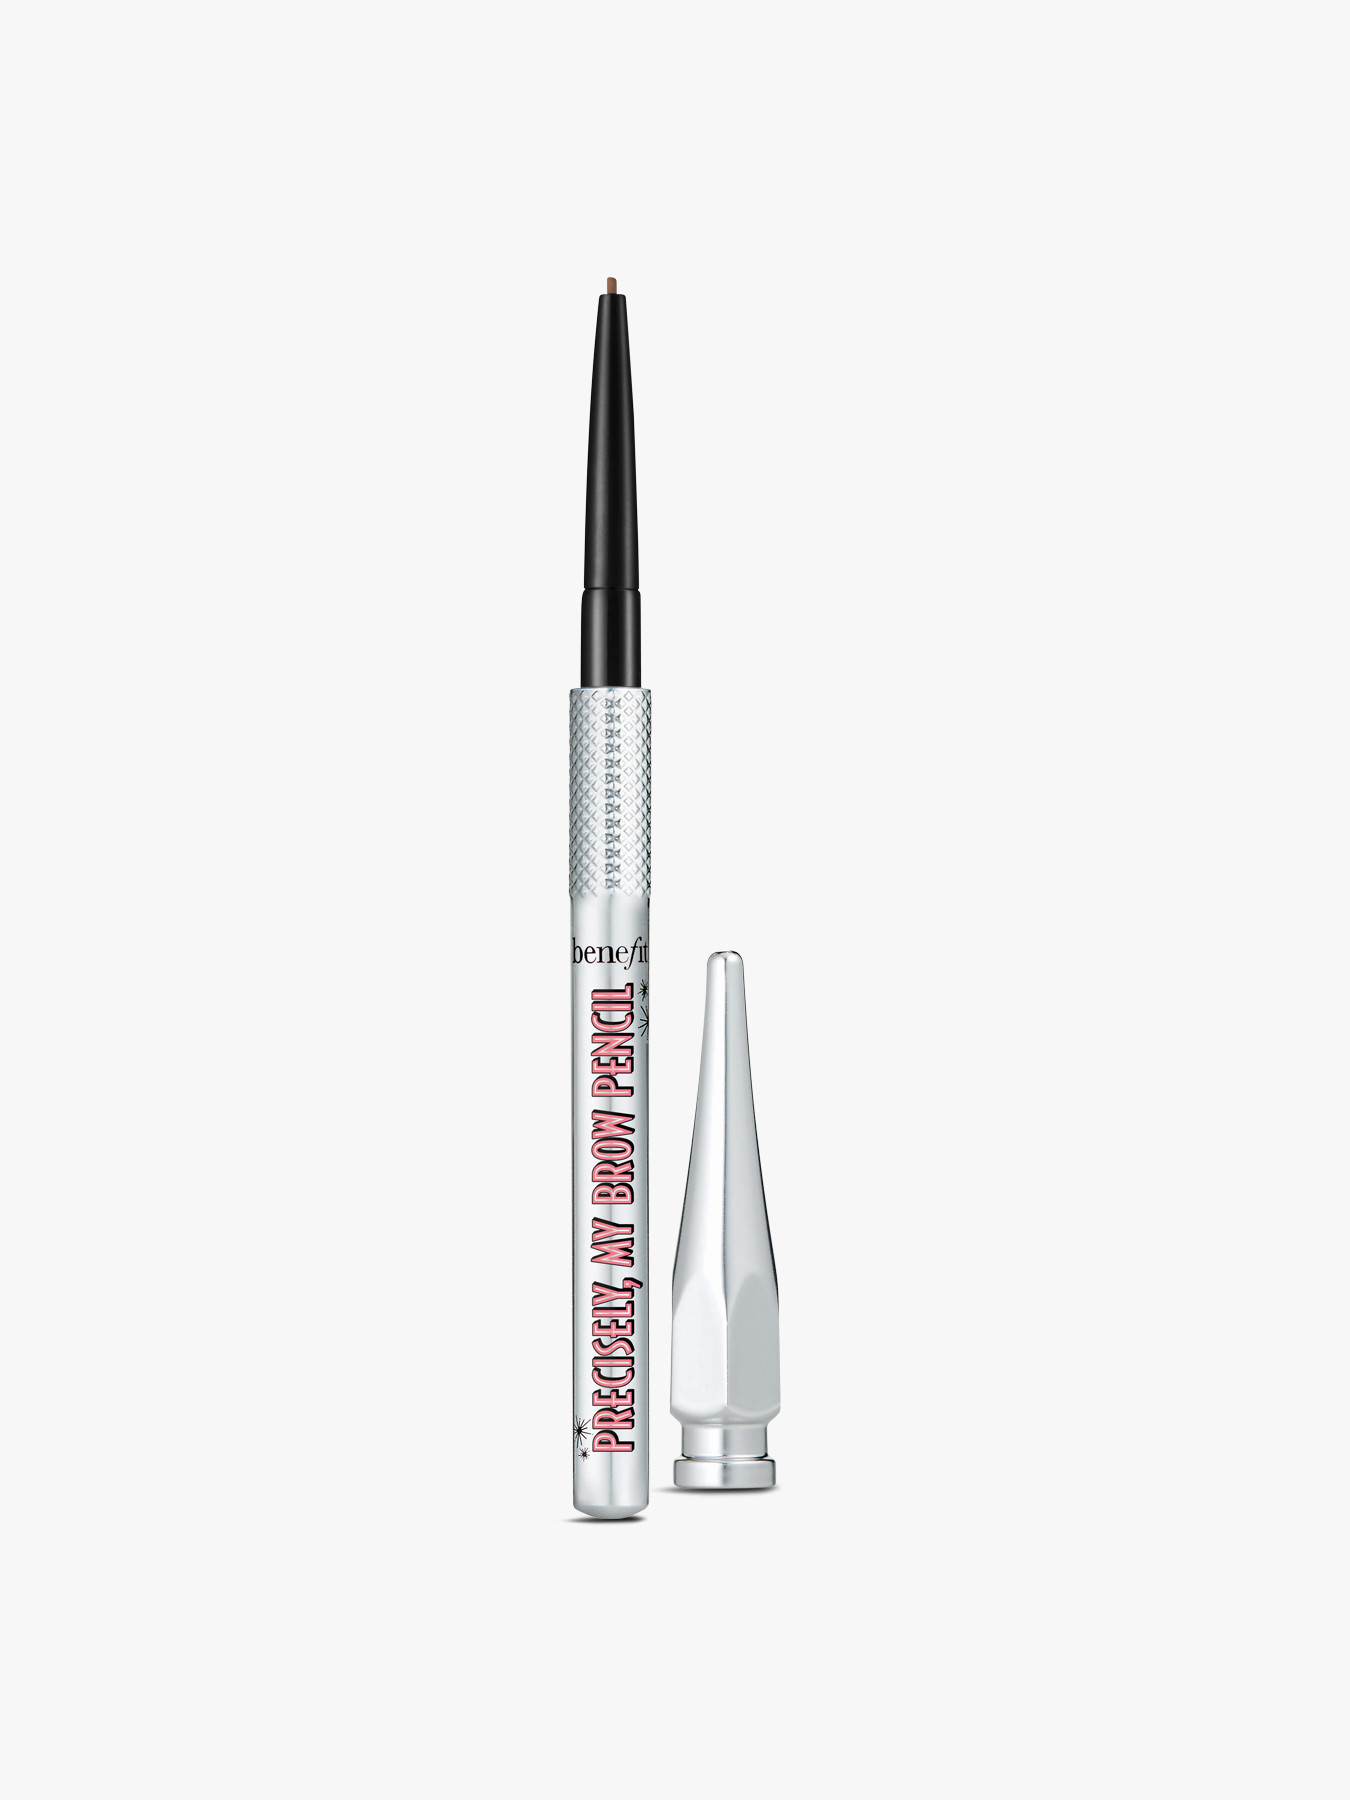 Benefit Precisely, My Brow Ultra-fine Brow Defining Pencil Mini 2.75